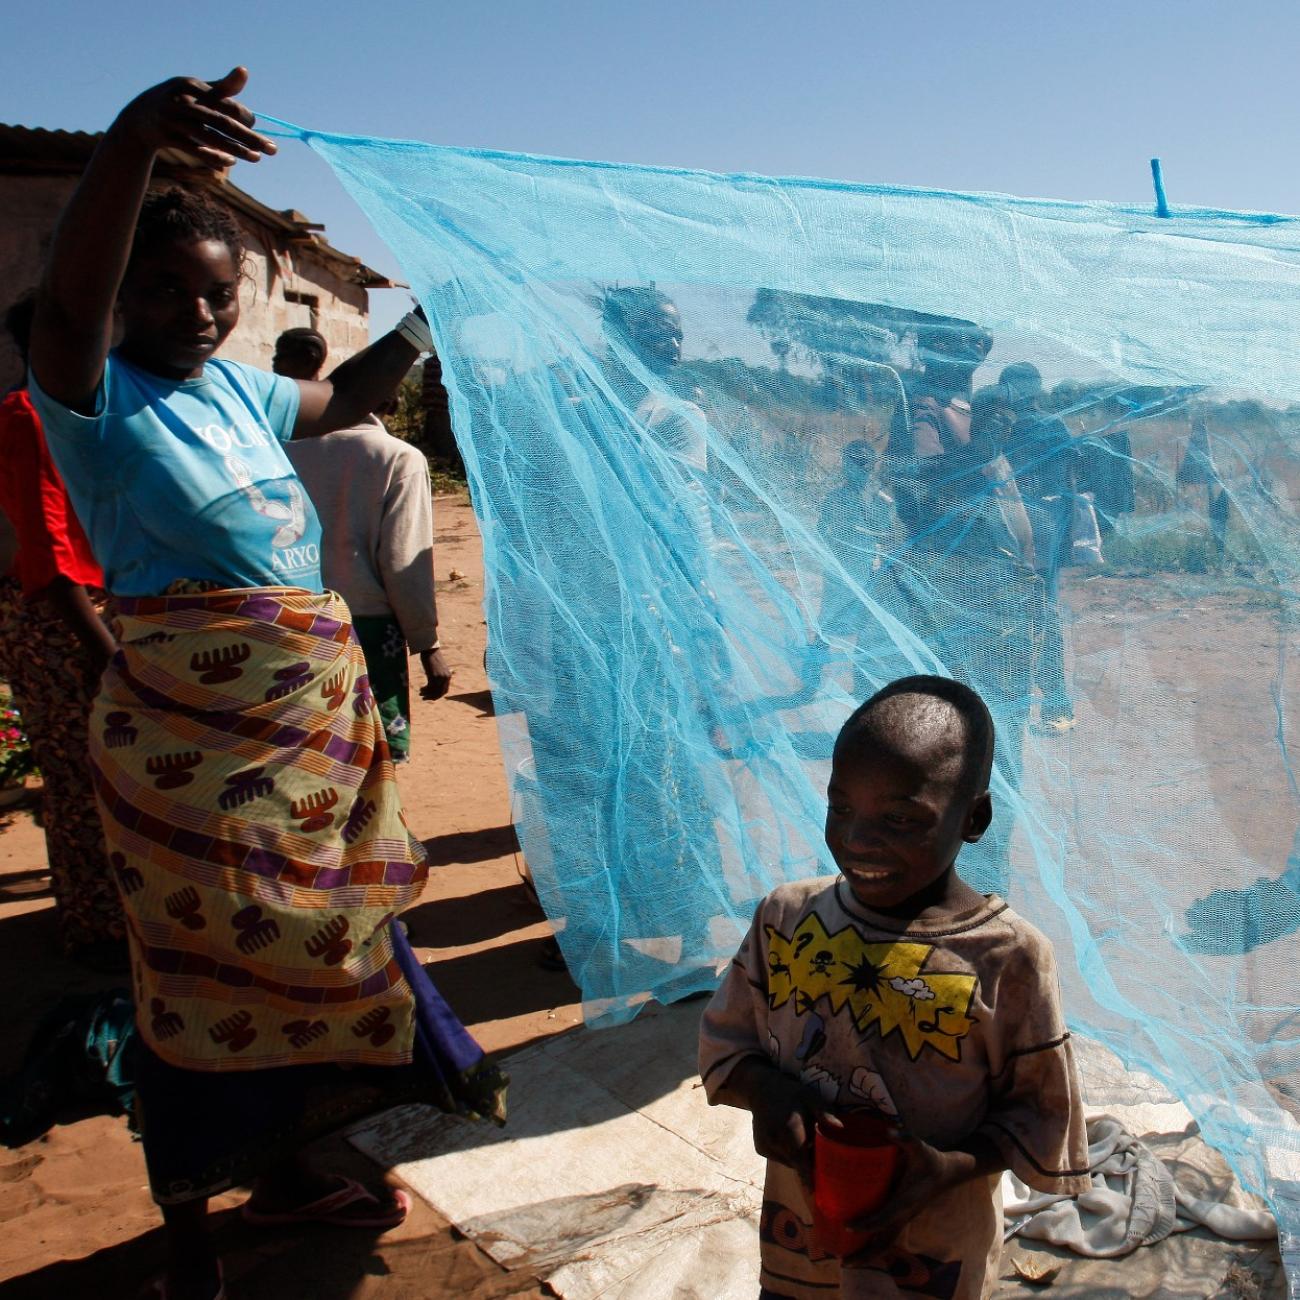 Zambian villagers display a mosquito net in Matongo village, in Zambia, on April 23, 2008.